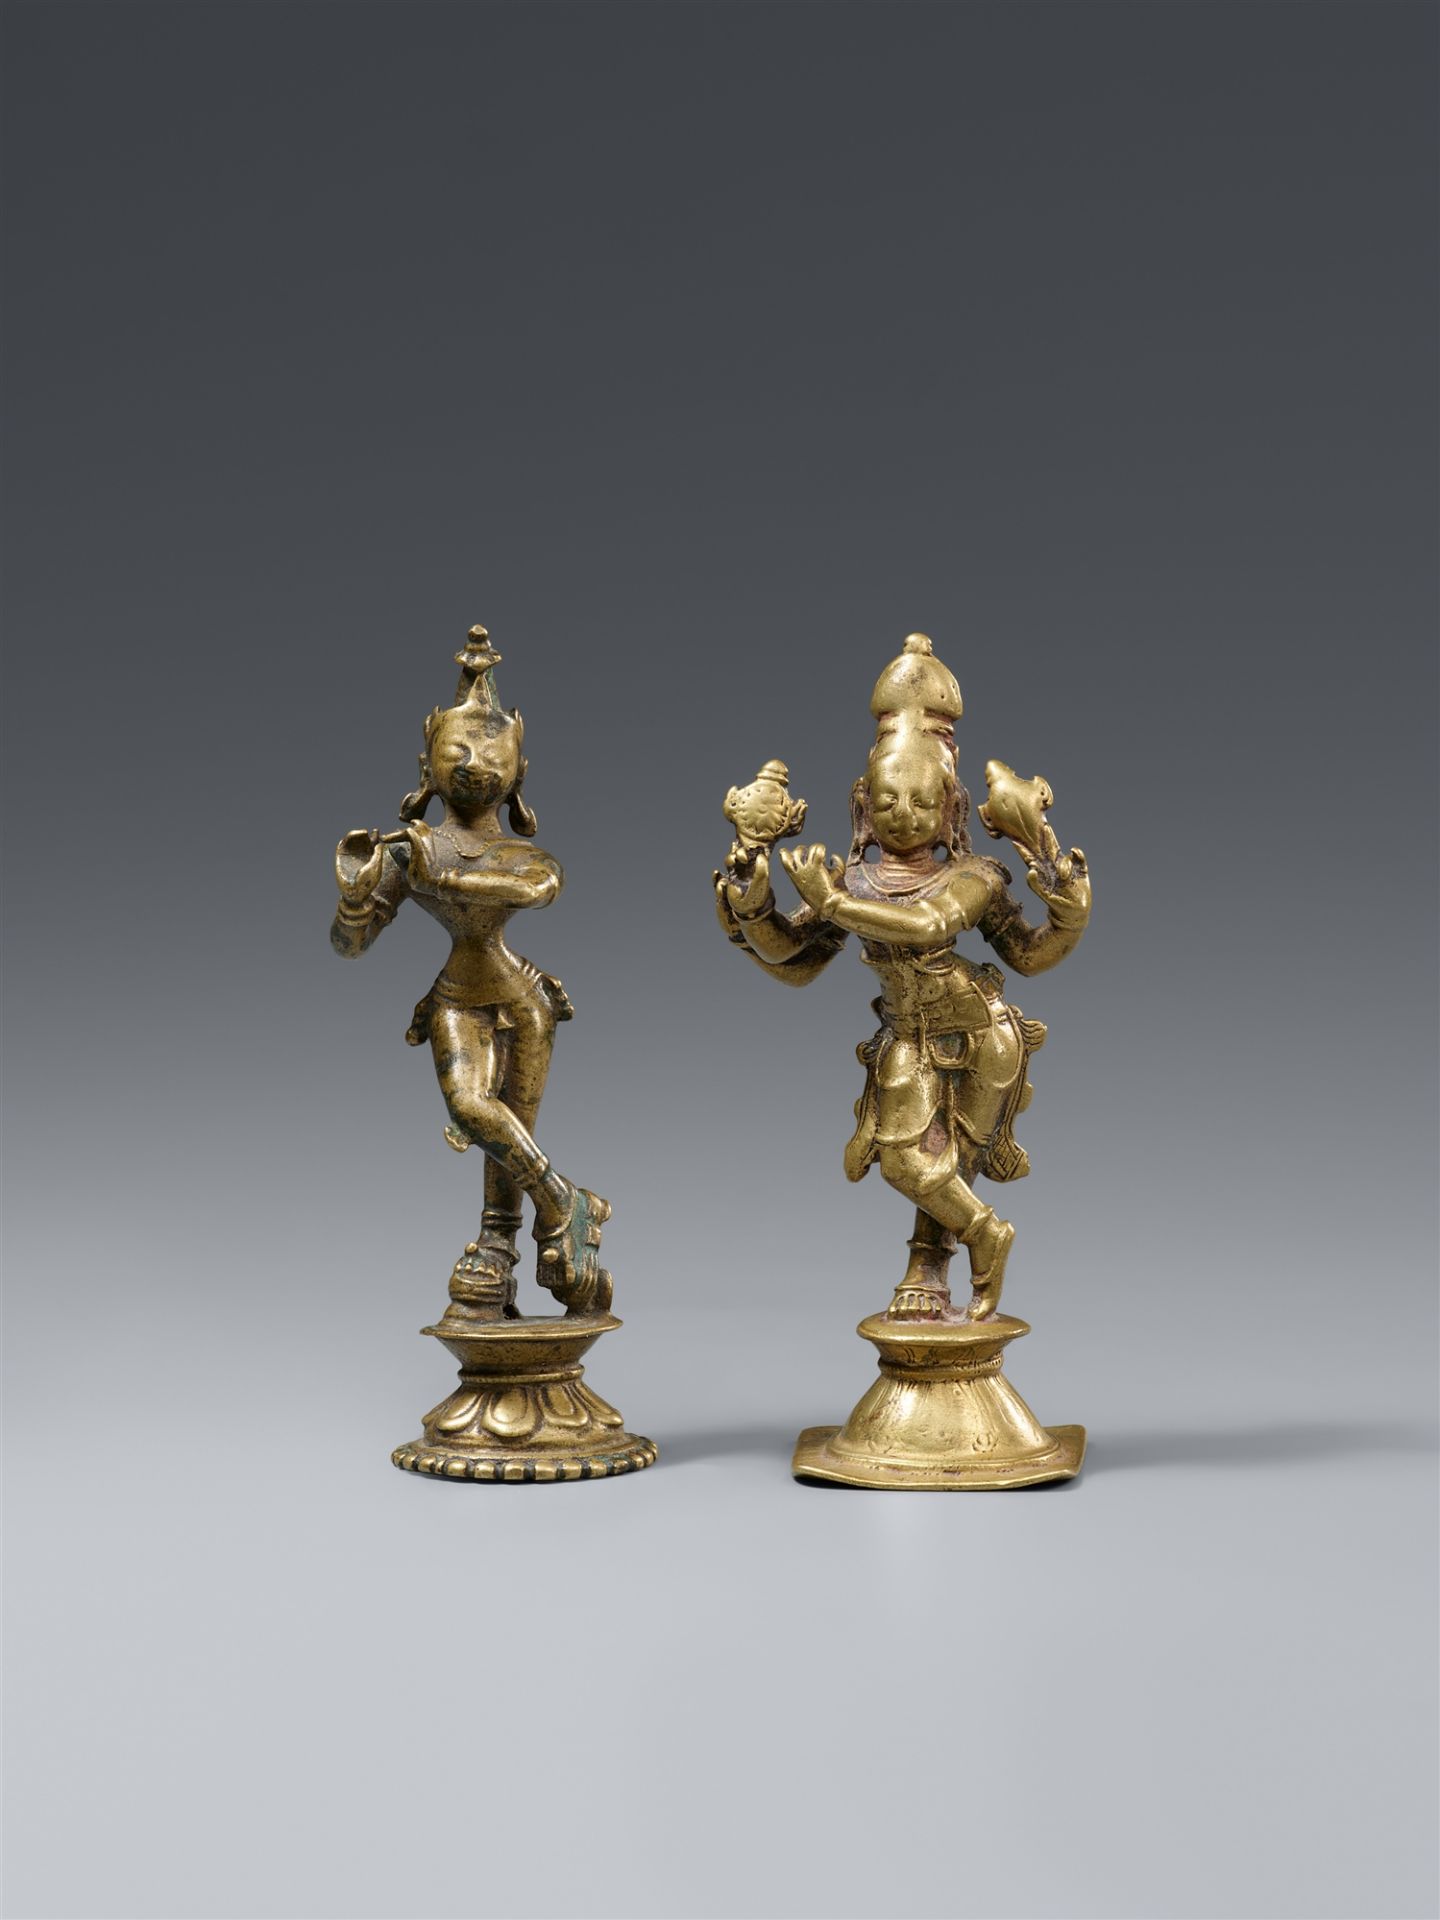 Two copper alloy figures of Venugopala. 18th century or later